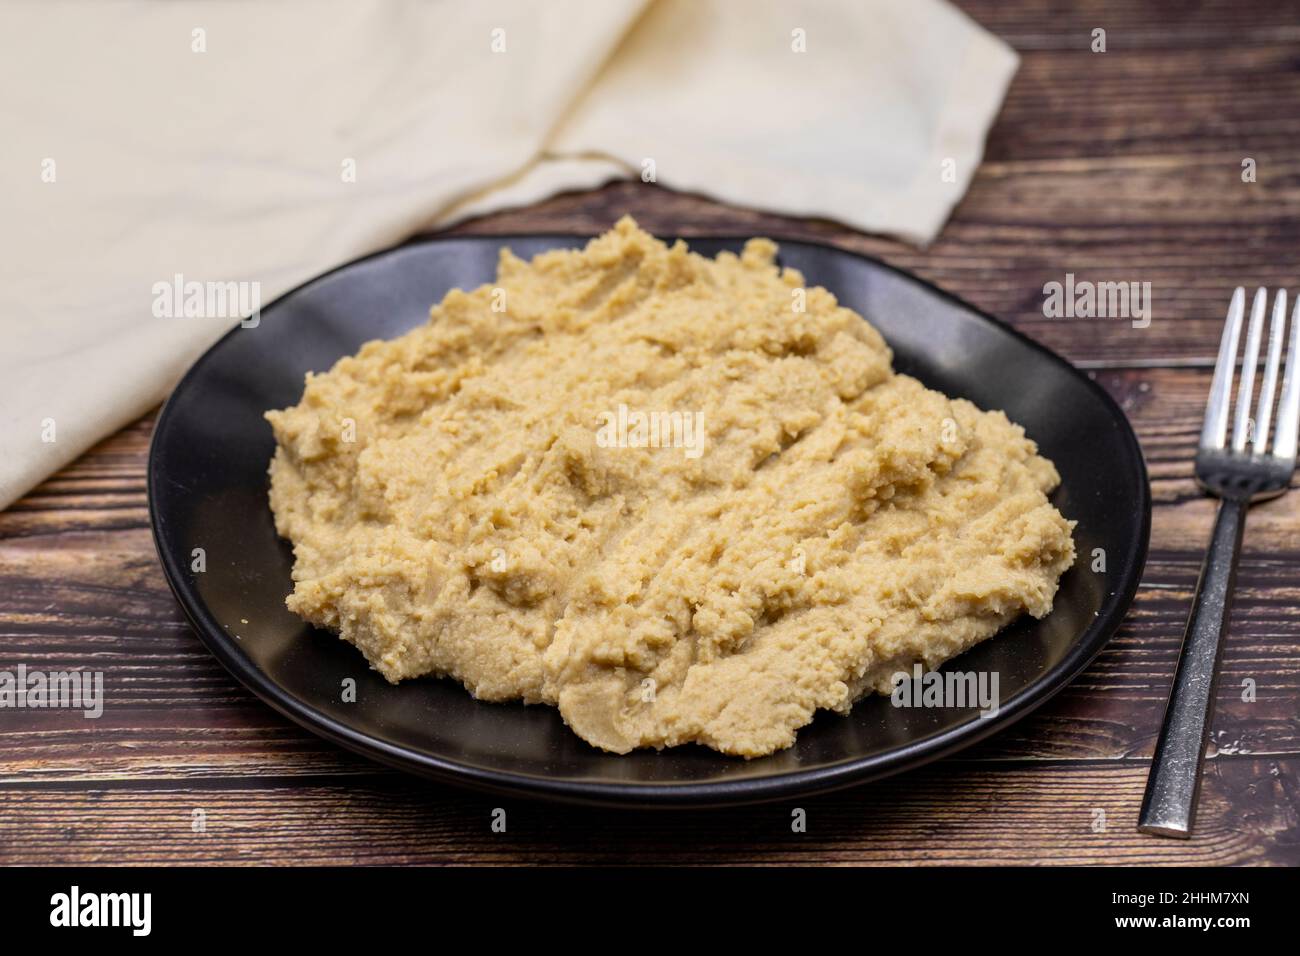 Hummus in a ceramic plate. Dishes of chickpeas, a vegetarian dish. Stock Photo